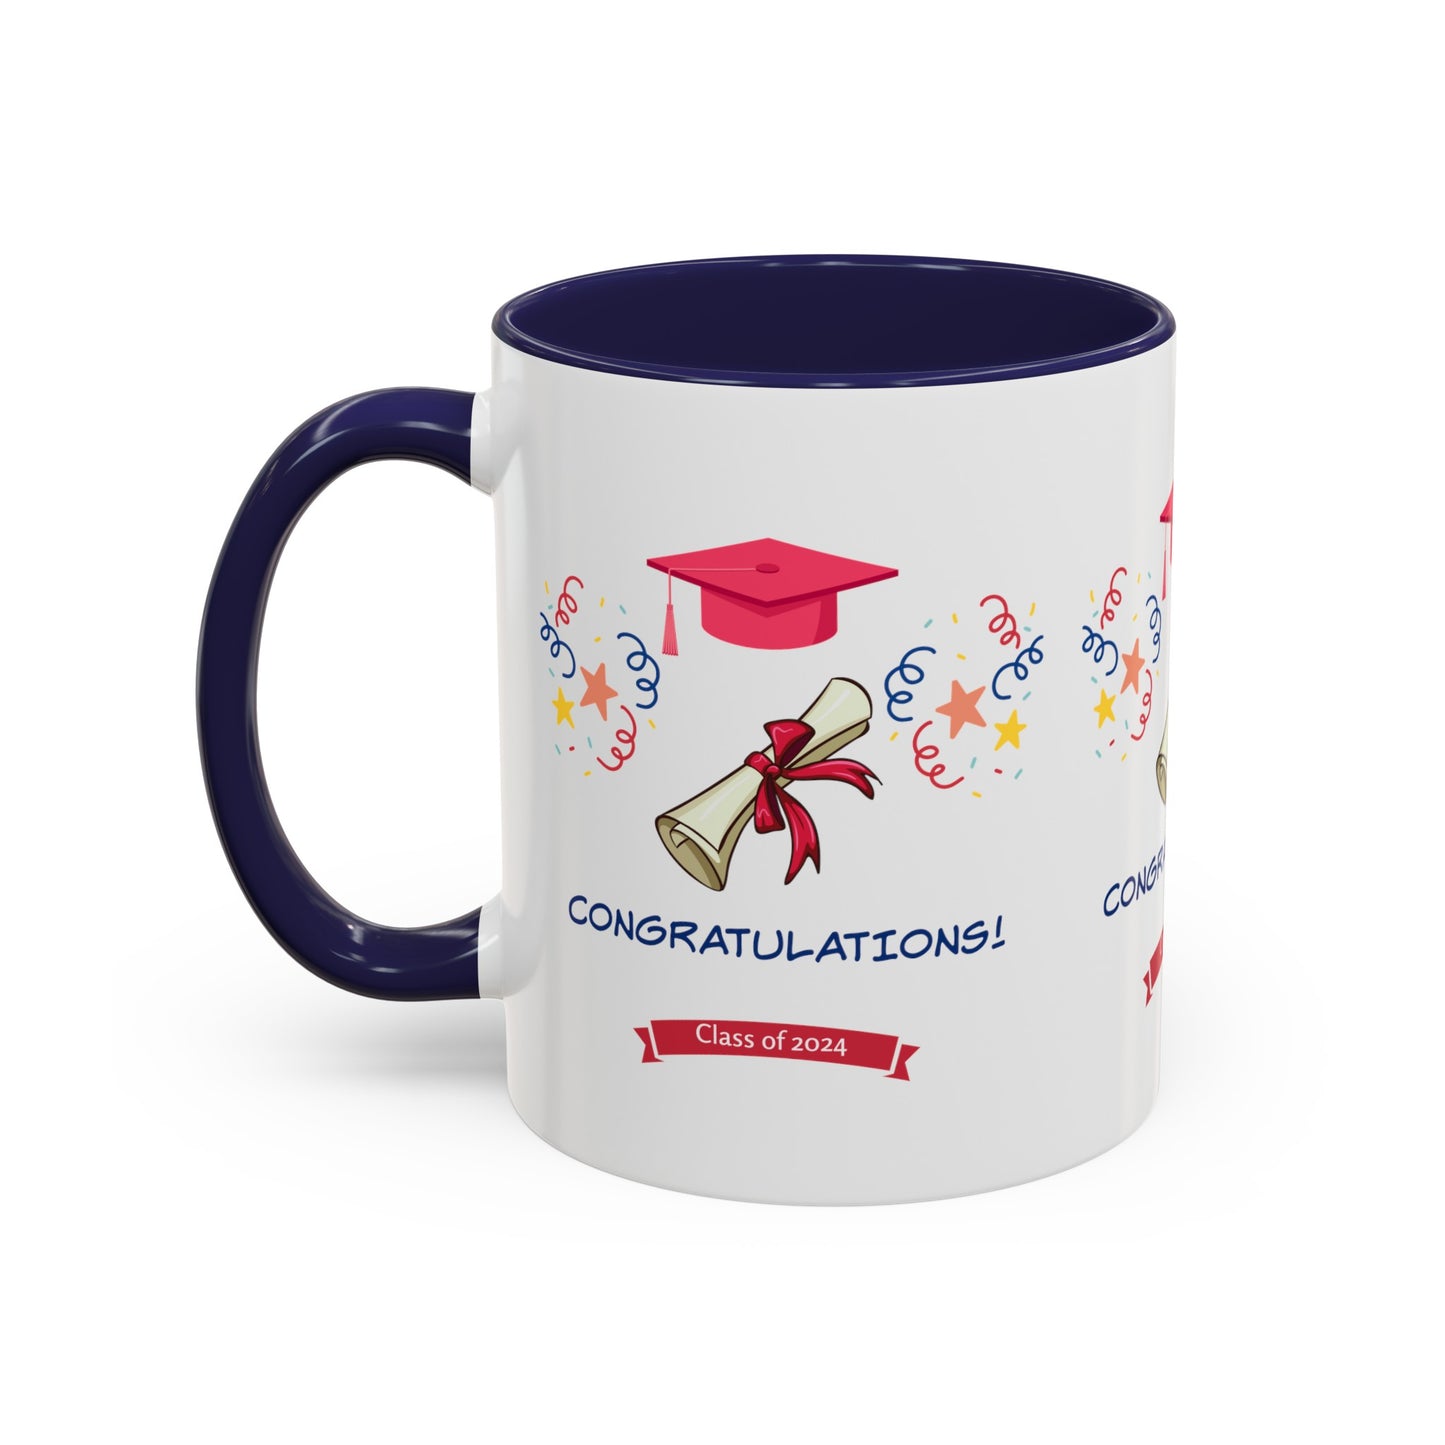 A white ceramic 2024 Congratulations Mug: Graduation; 11 oz.; 2 Colors with a blue handle and interior, featuring graduation motifs including a cap, diploma, confetti, and the text "CONGRATULATIONS! Class of 2024". This American-made mug by Printify celebrates your achievements in style.